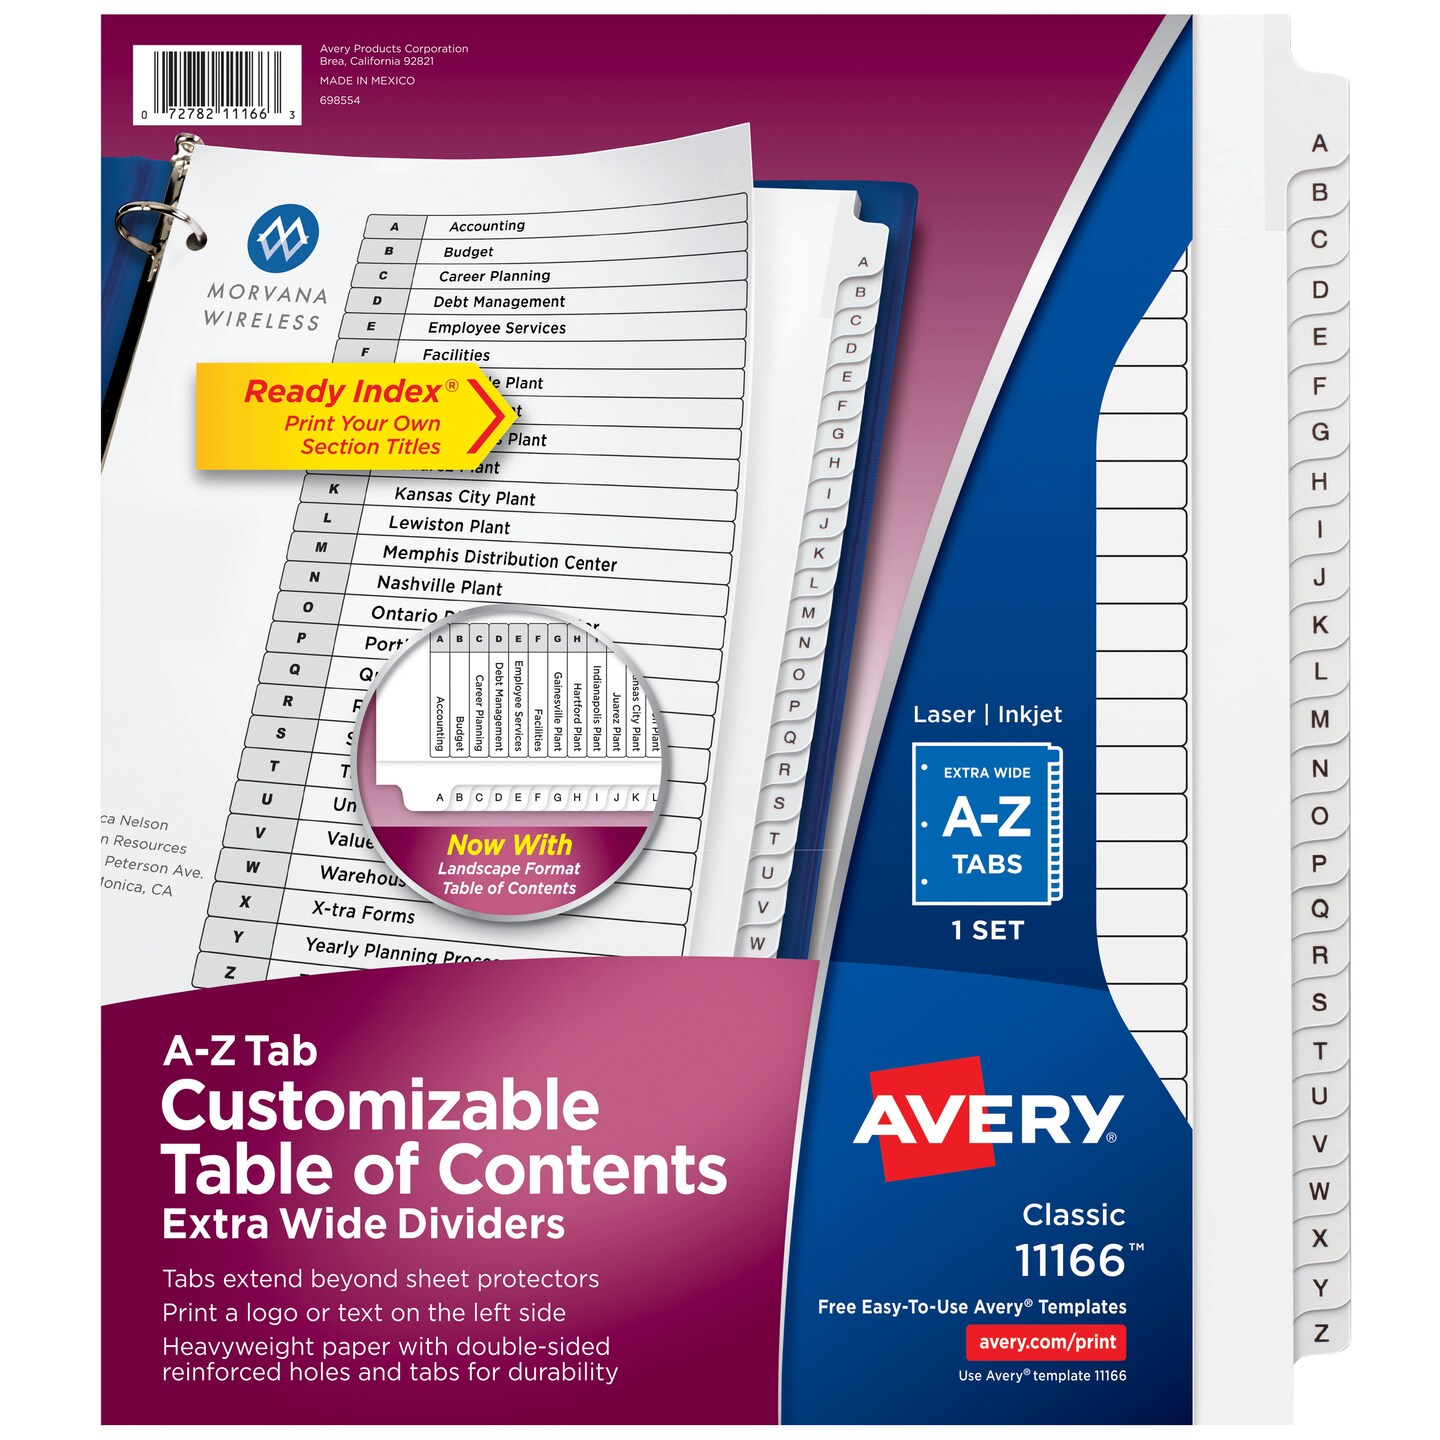 Avery Extra-Wide 26 Tab A-Z Dividers for 3 Ring Binders, Customizable Table of Contents, White Tabs, Works With Sheet Protectors, 1 Set (11166)